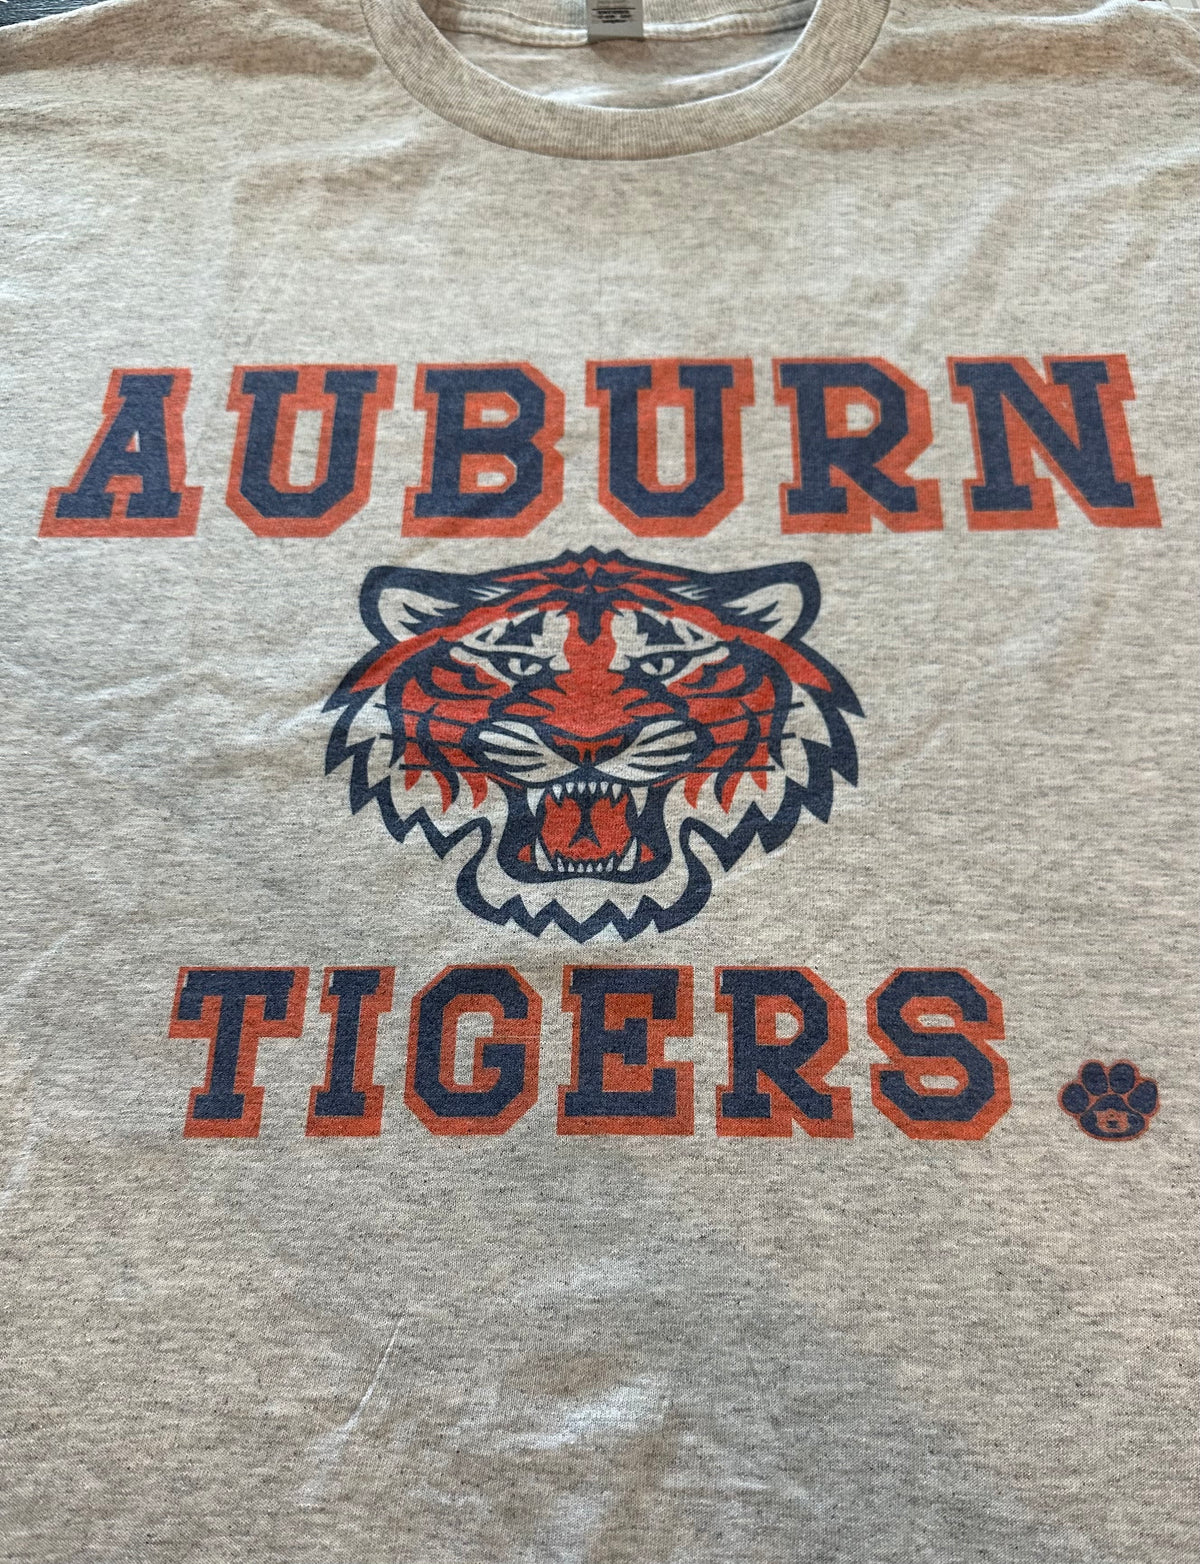 Auburn Tigers with Mascot Graphic Tee